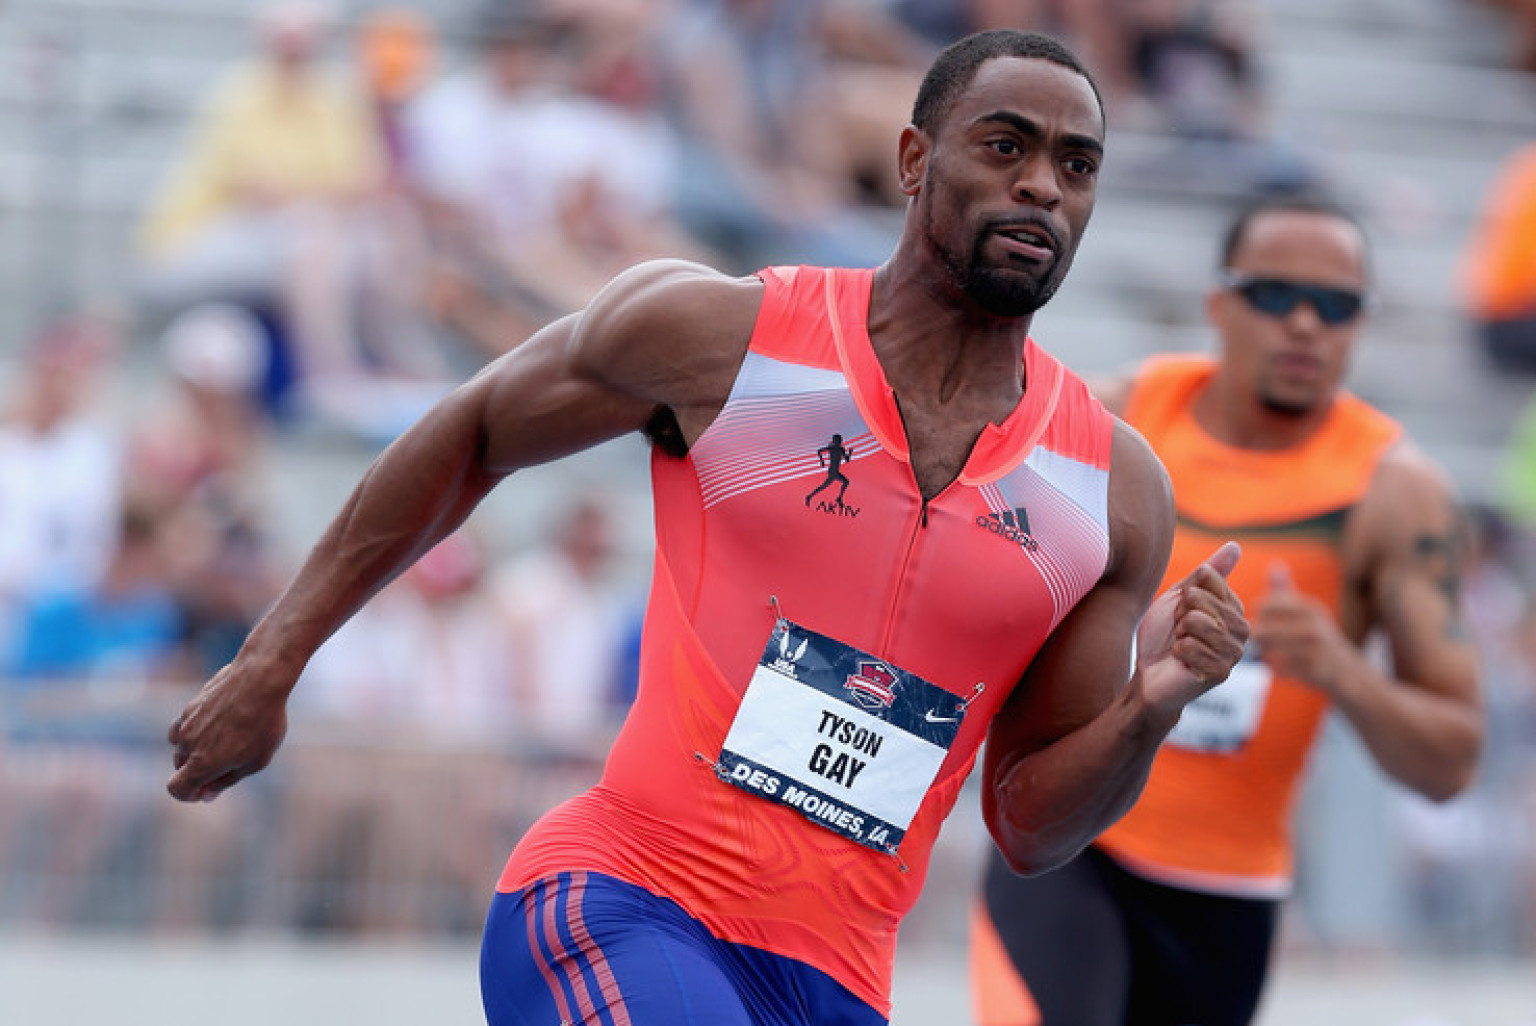 Fast times at US Trials; Gatlin, Gay, Bowie move into 100m semis